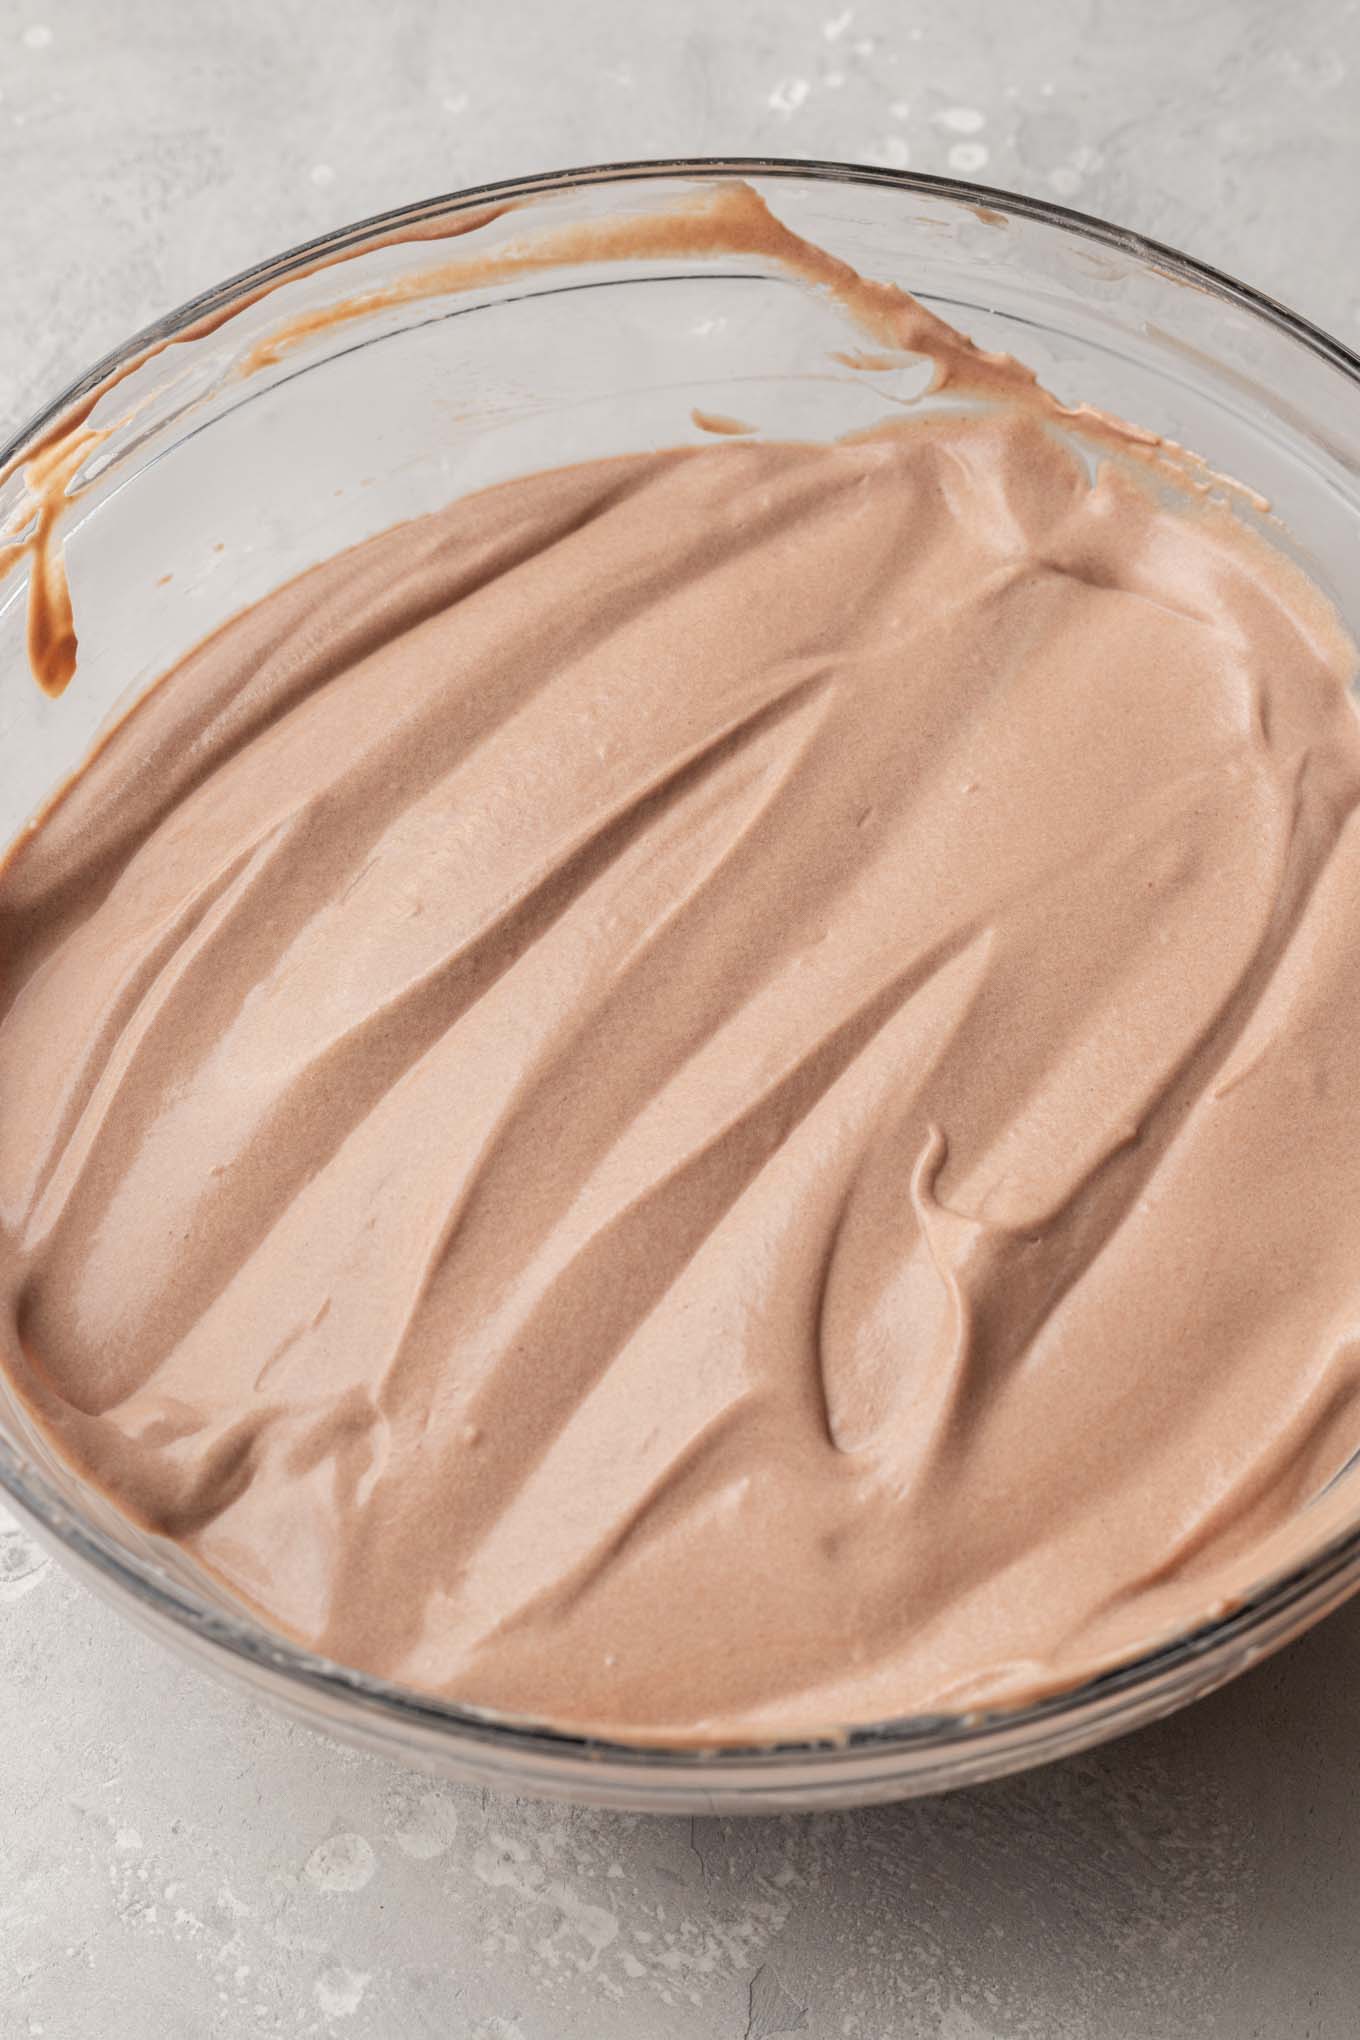 An overhead view of the chocolate pudding mixture with whipped cream folded into it.